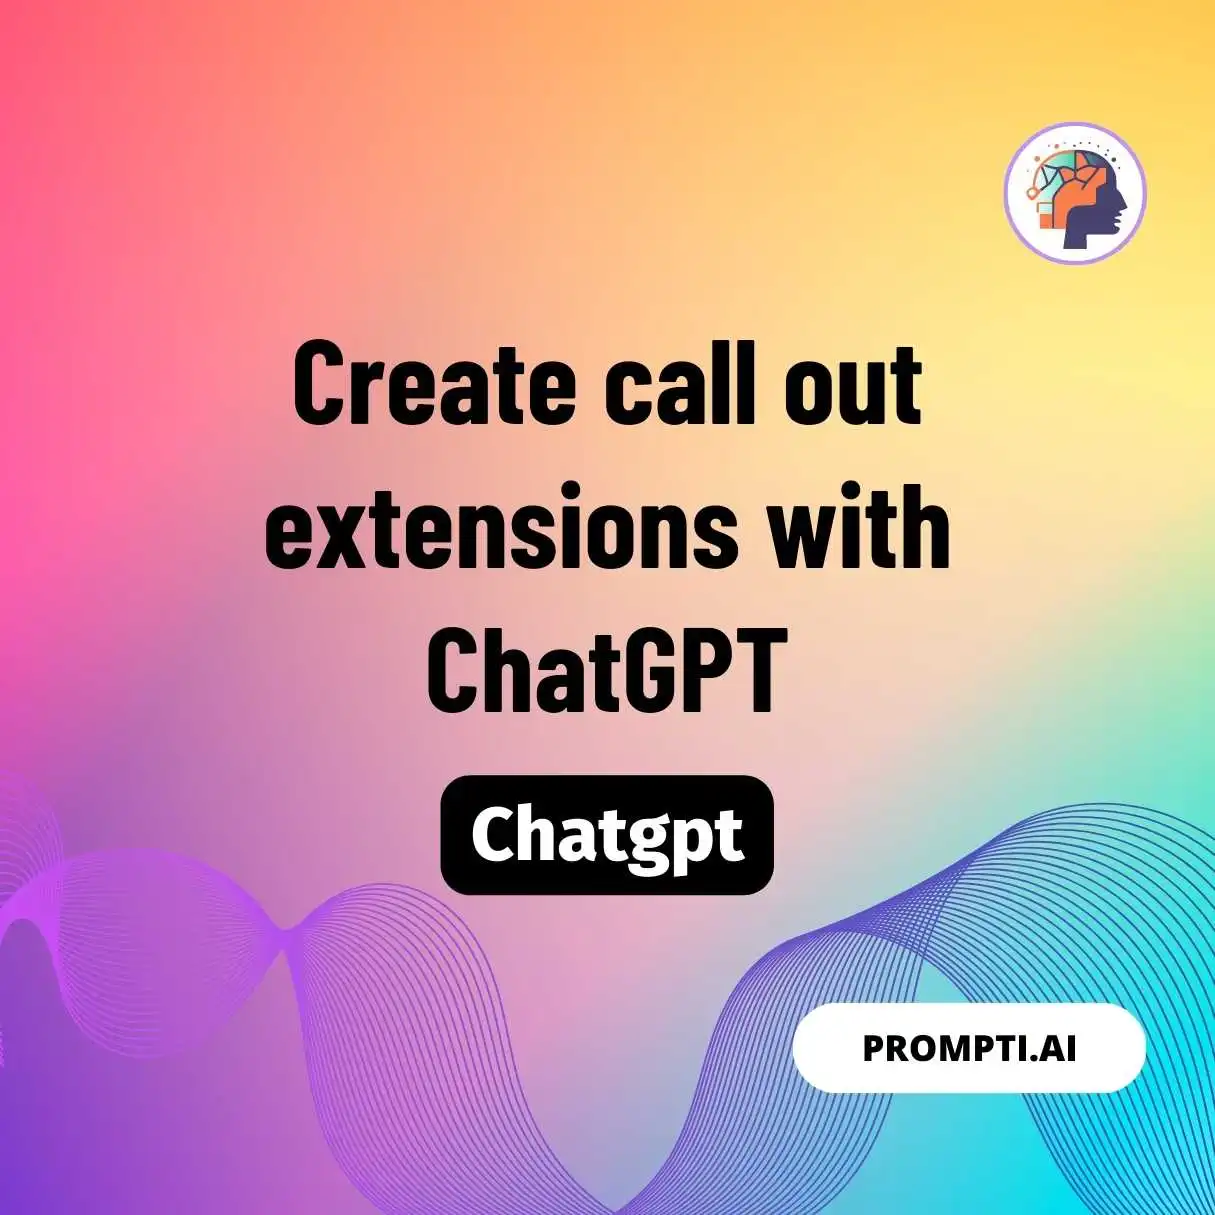 Create call out extensions with ChatGPT